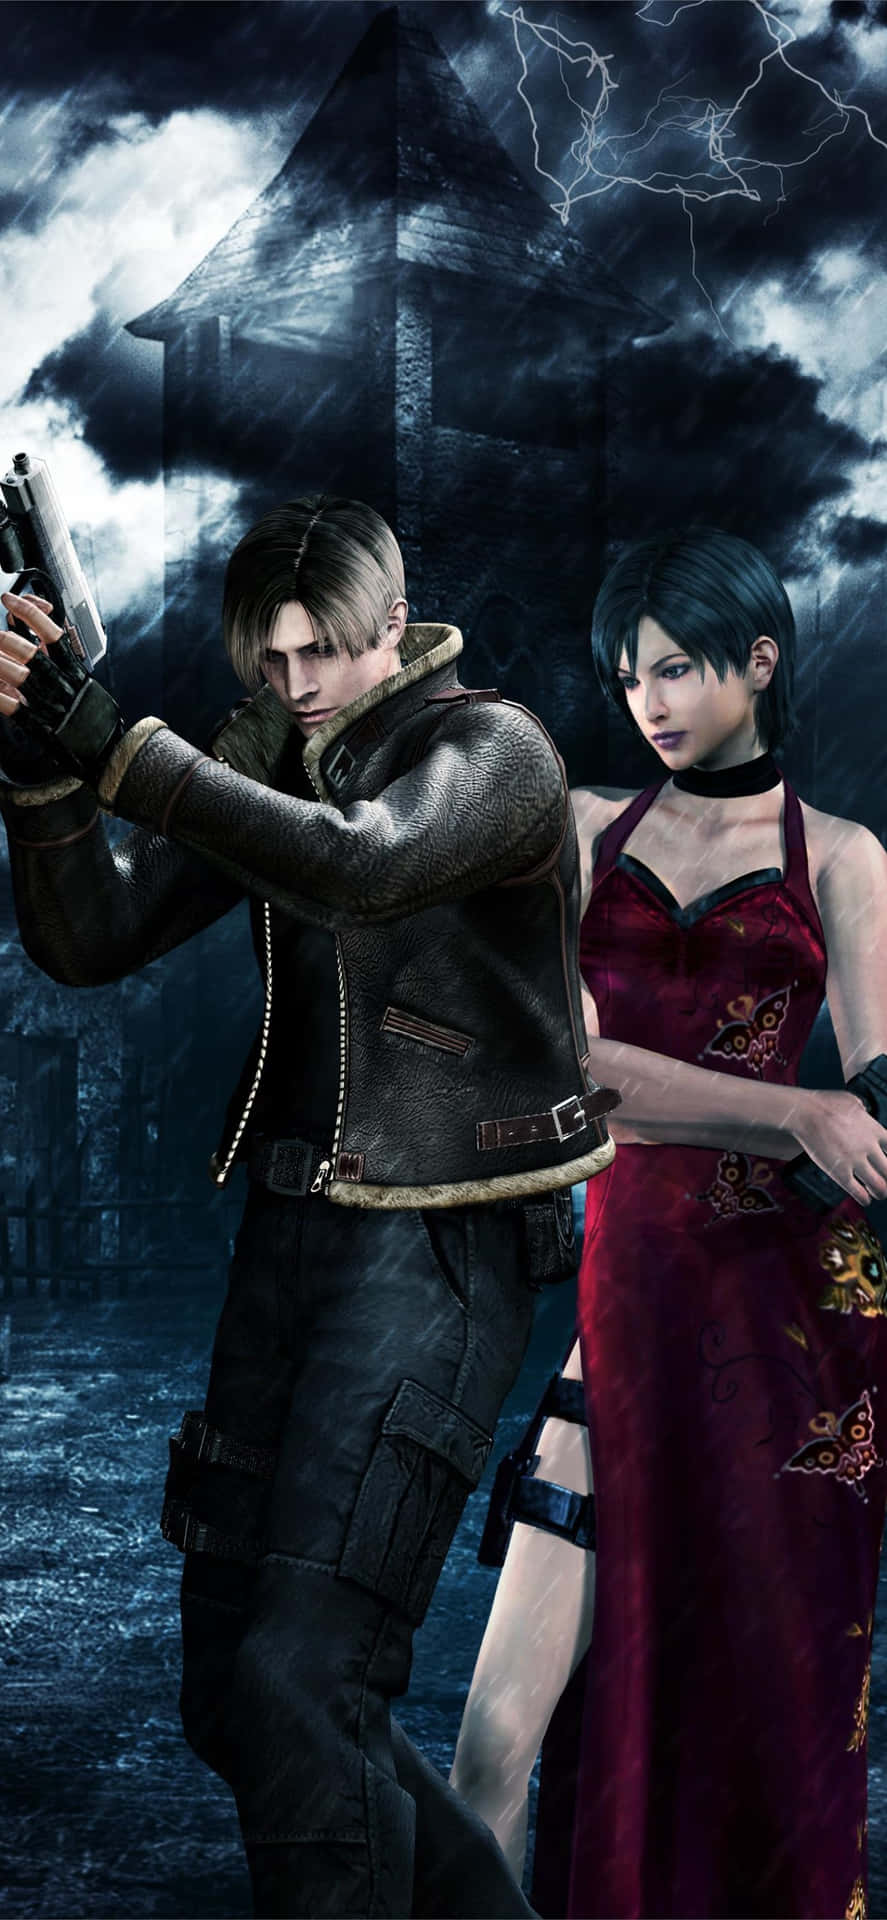 "Experience the ultimate thrill on your iPhone with Resident Evil!" Wallpaper